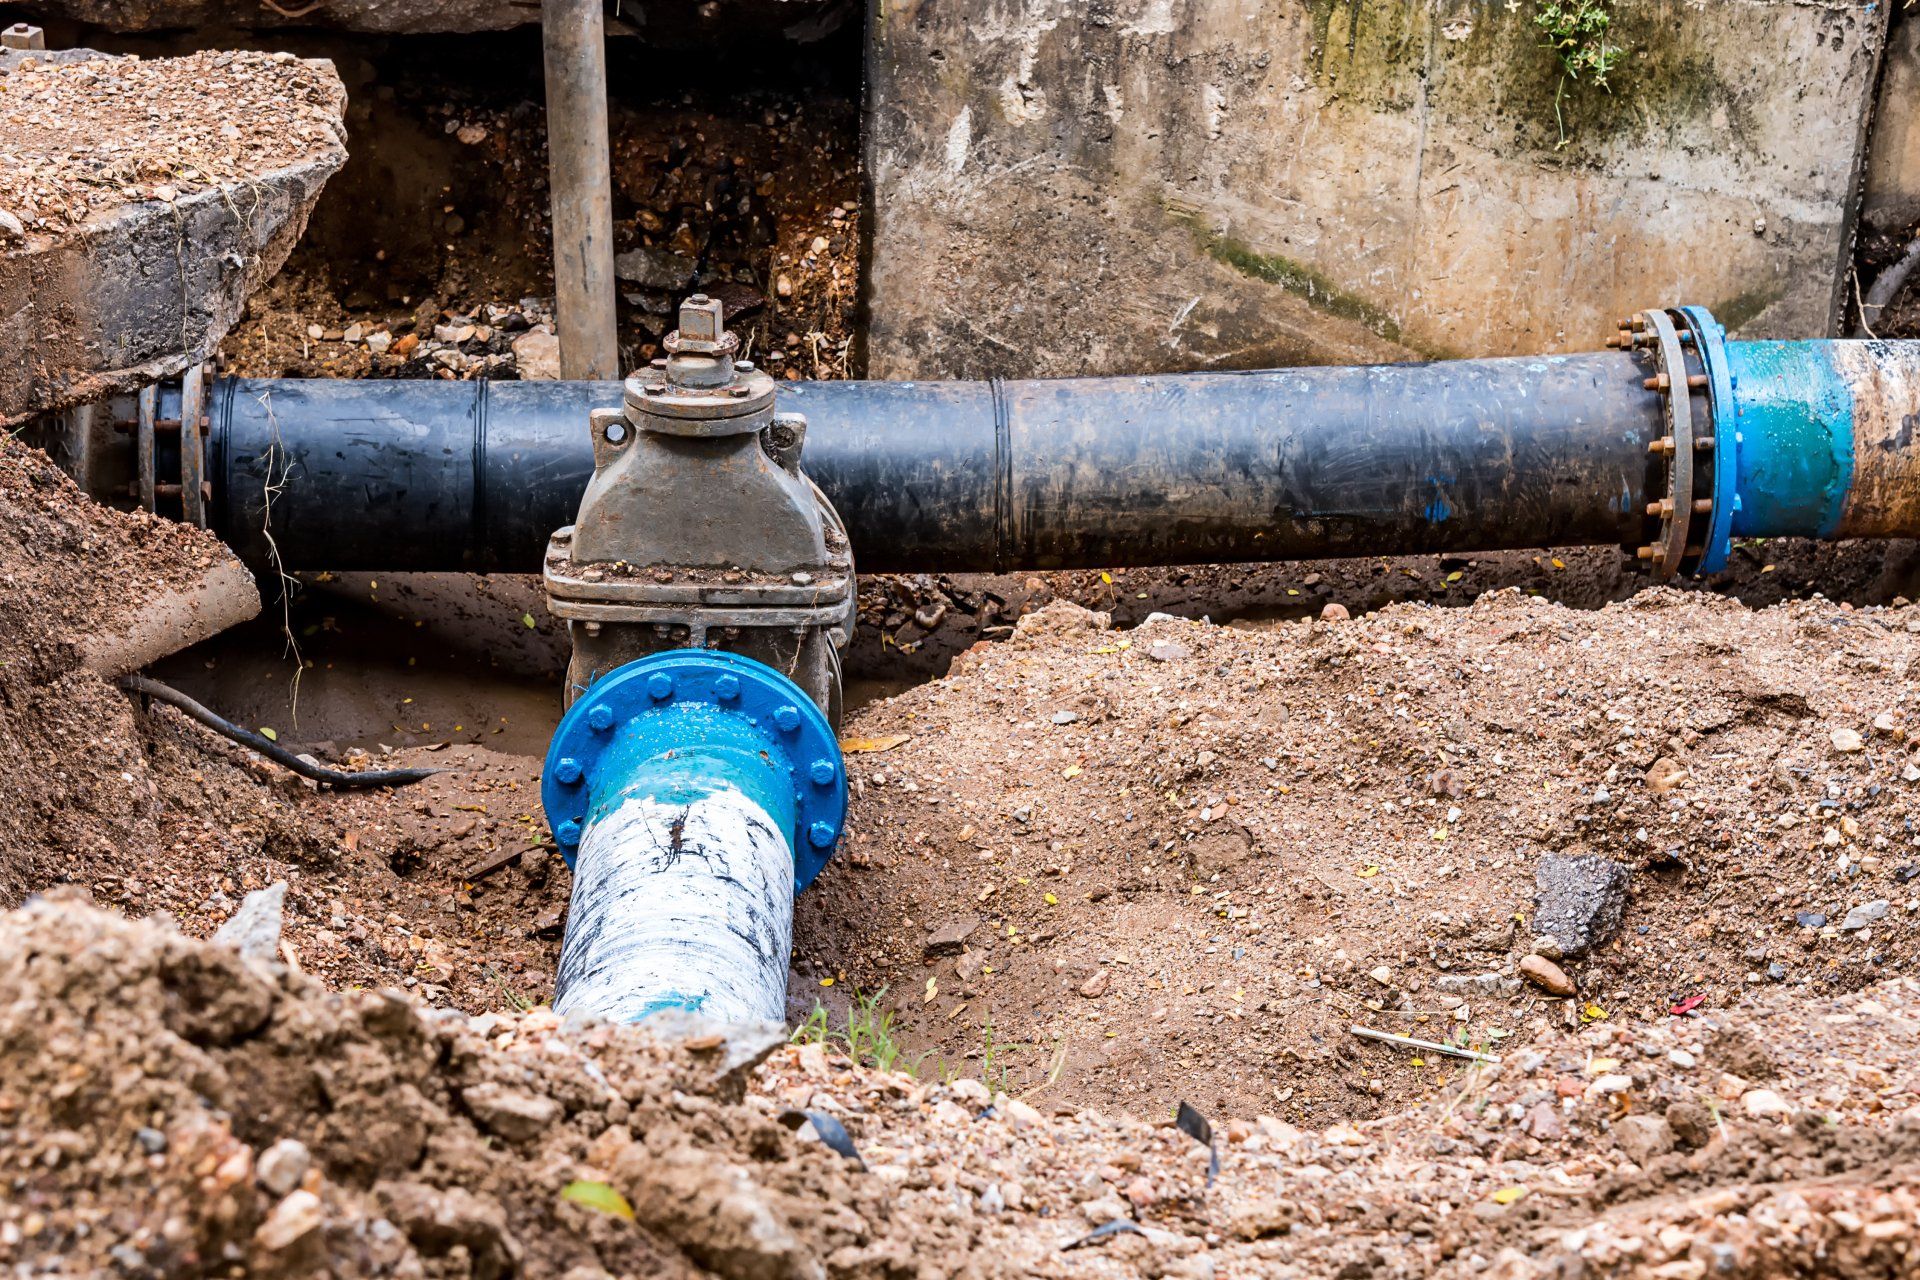 cured in place pipe repairs (cipp)